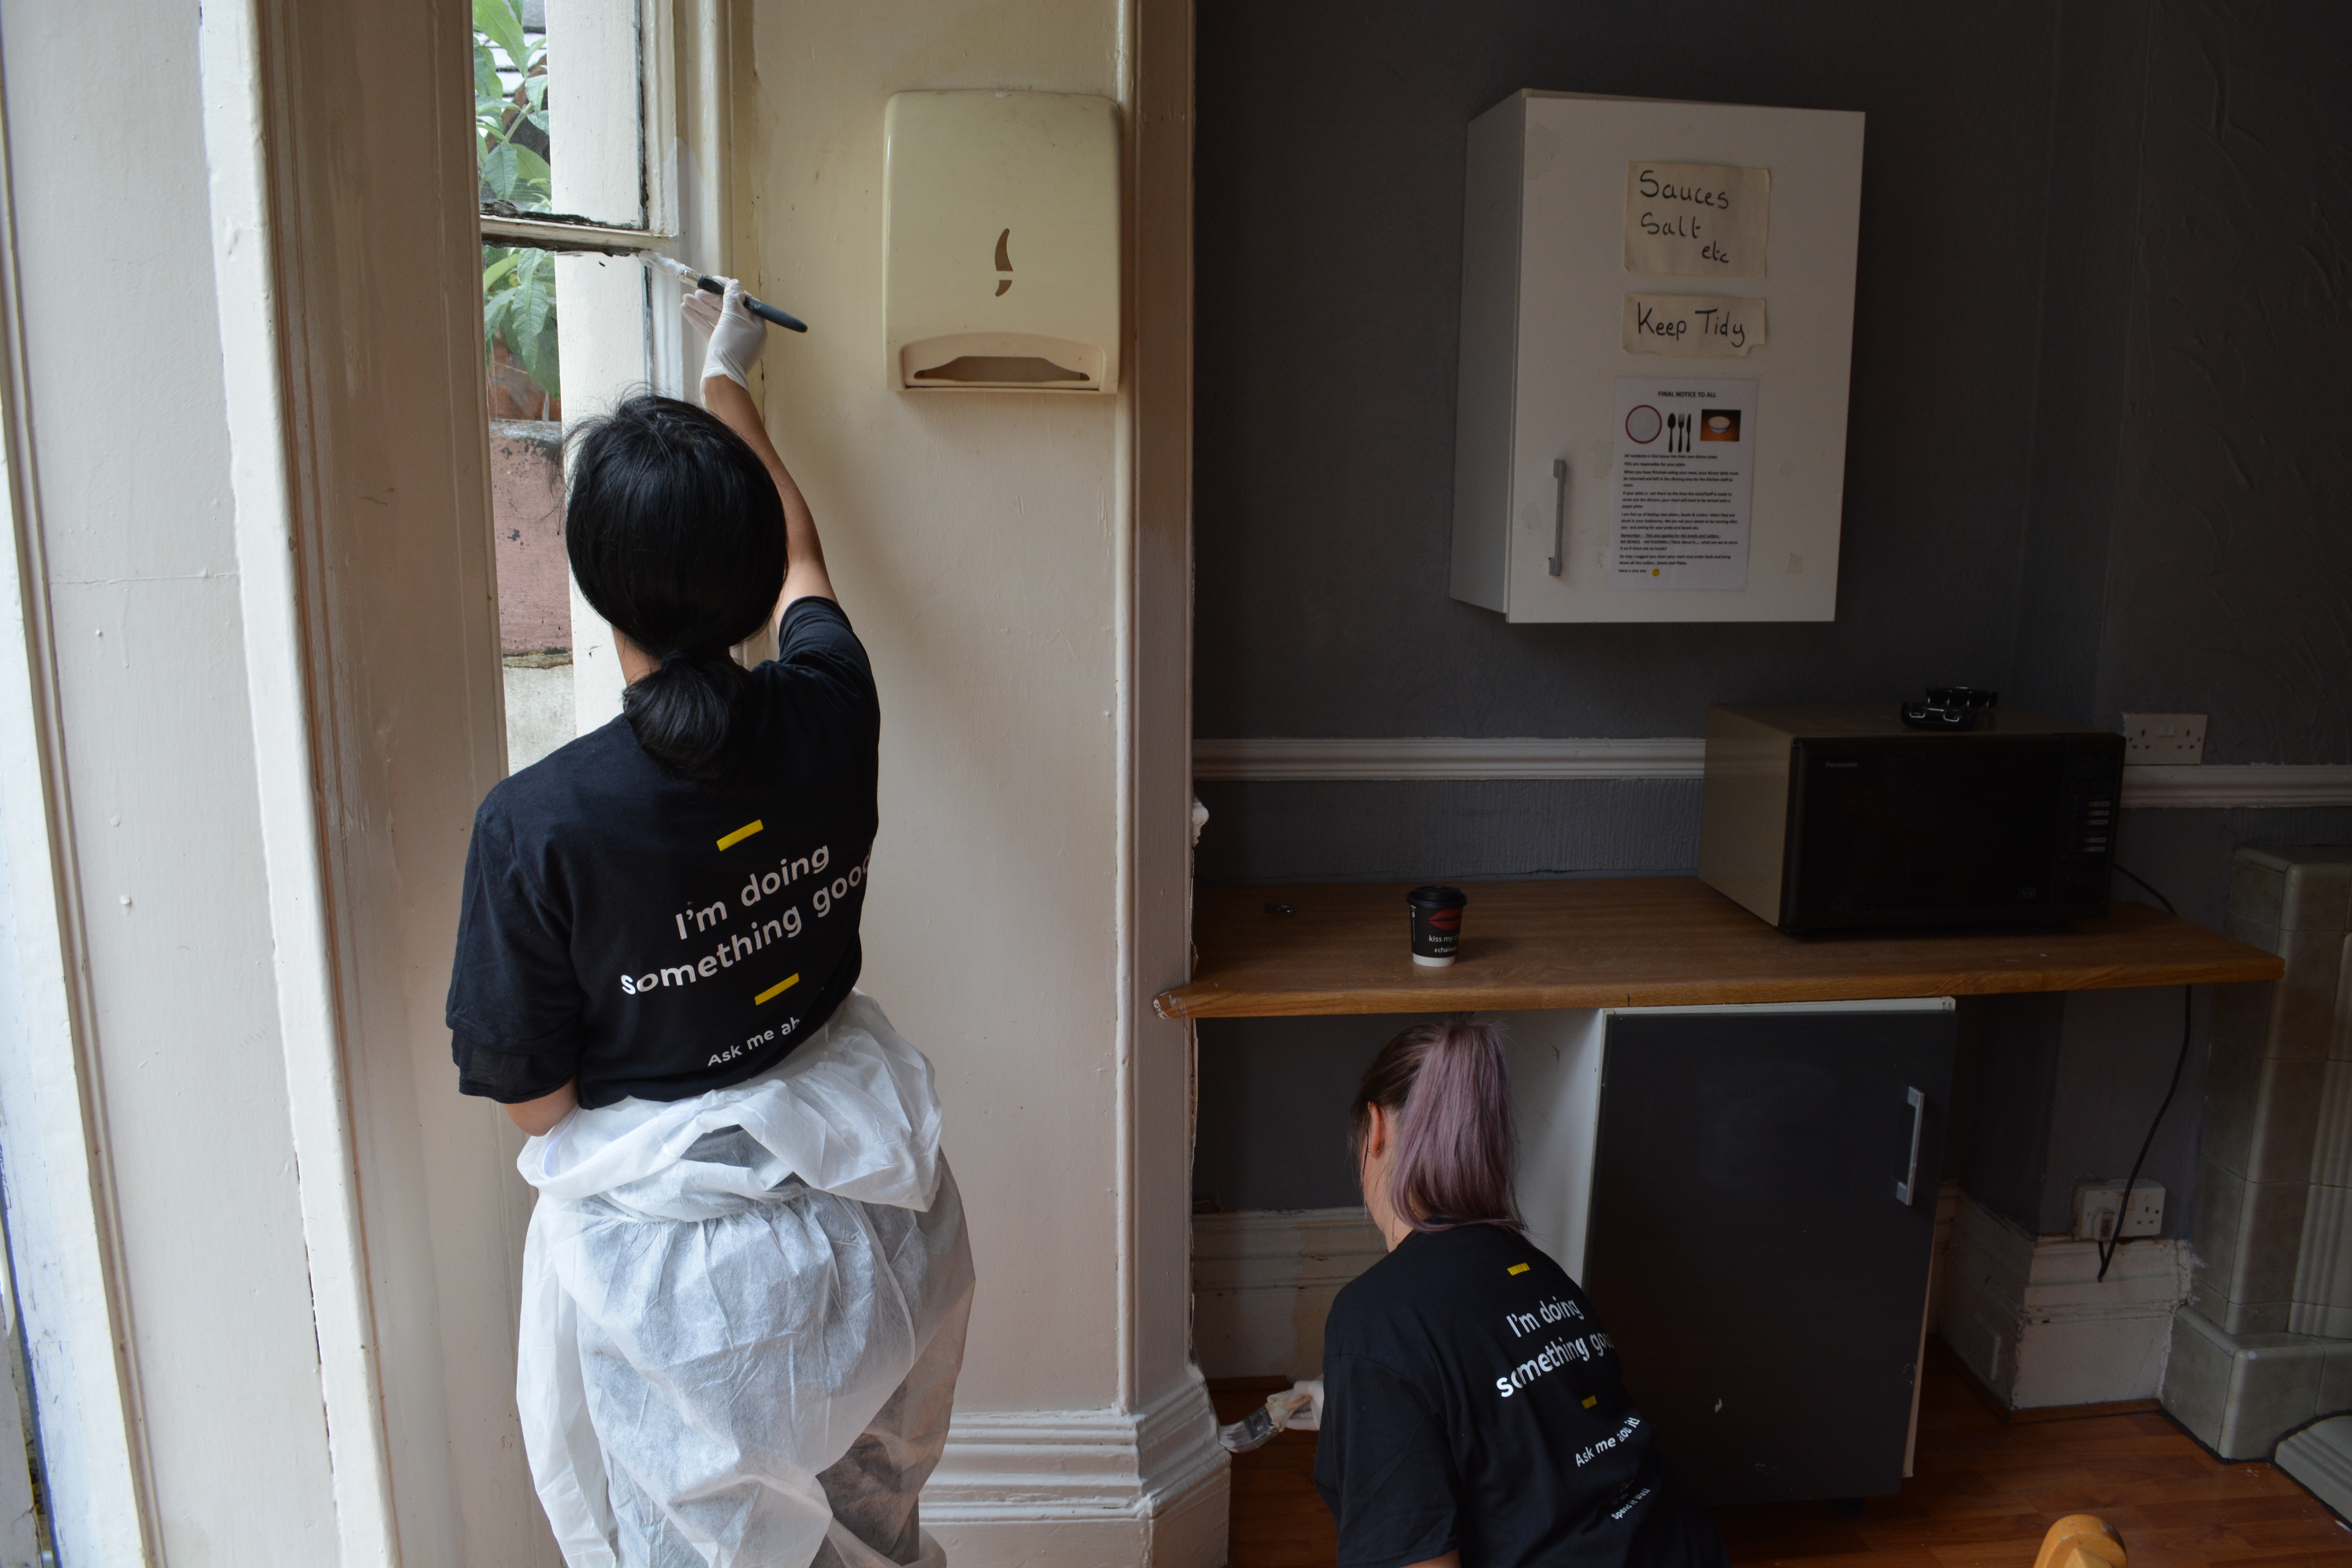 Redecorating a kitchen at Community RePaint Sandwell and Soho.